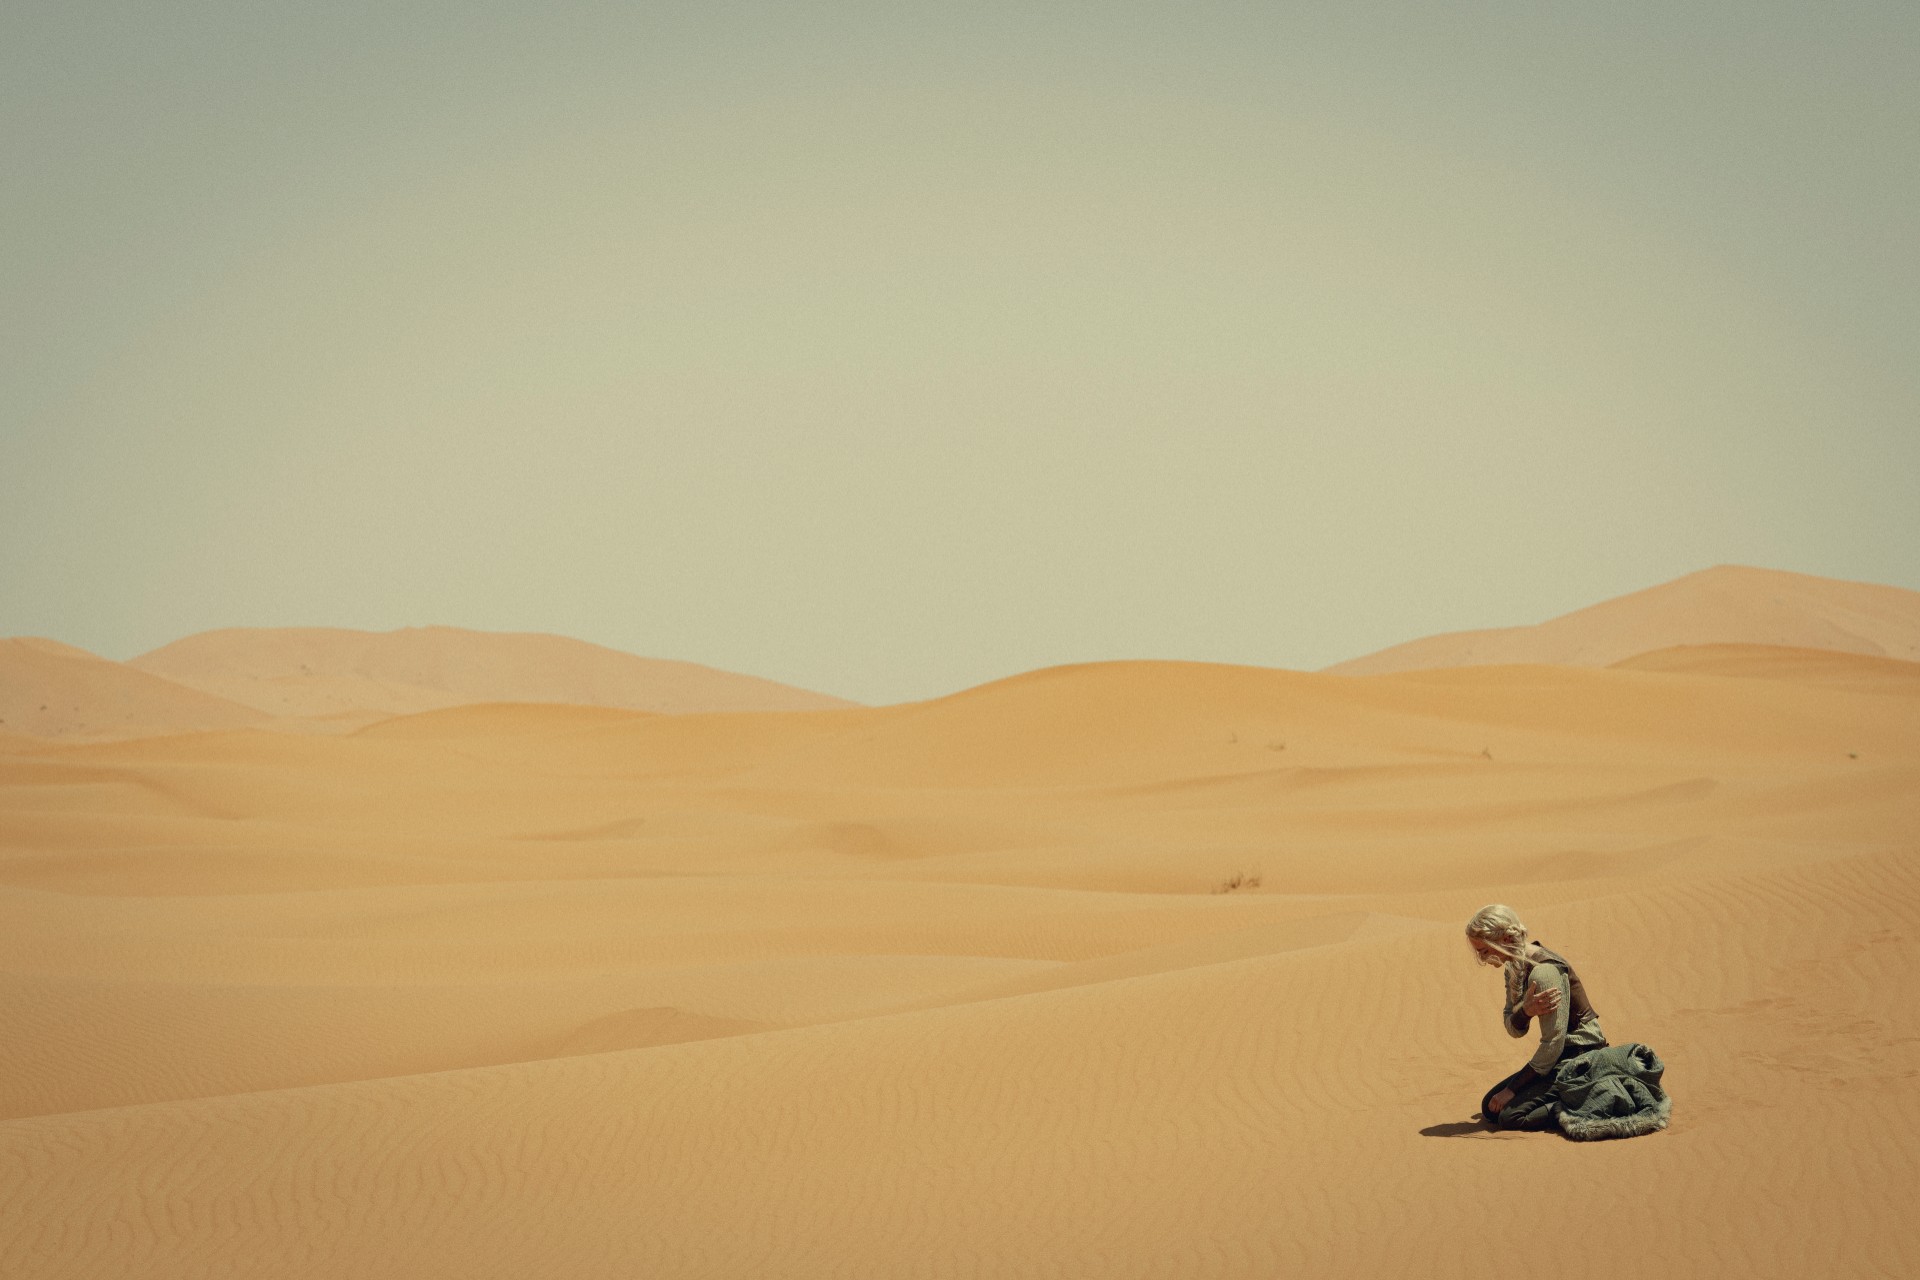 A woman sits in a vast desert in The Witcher season 3.